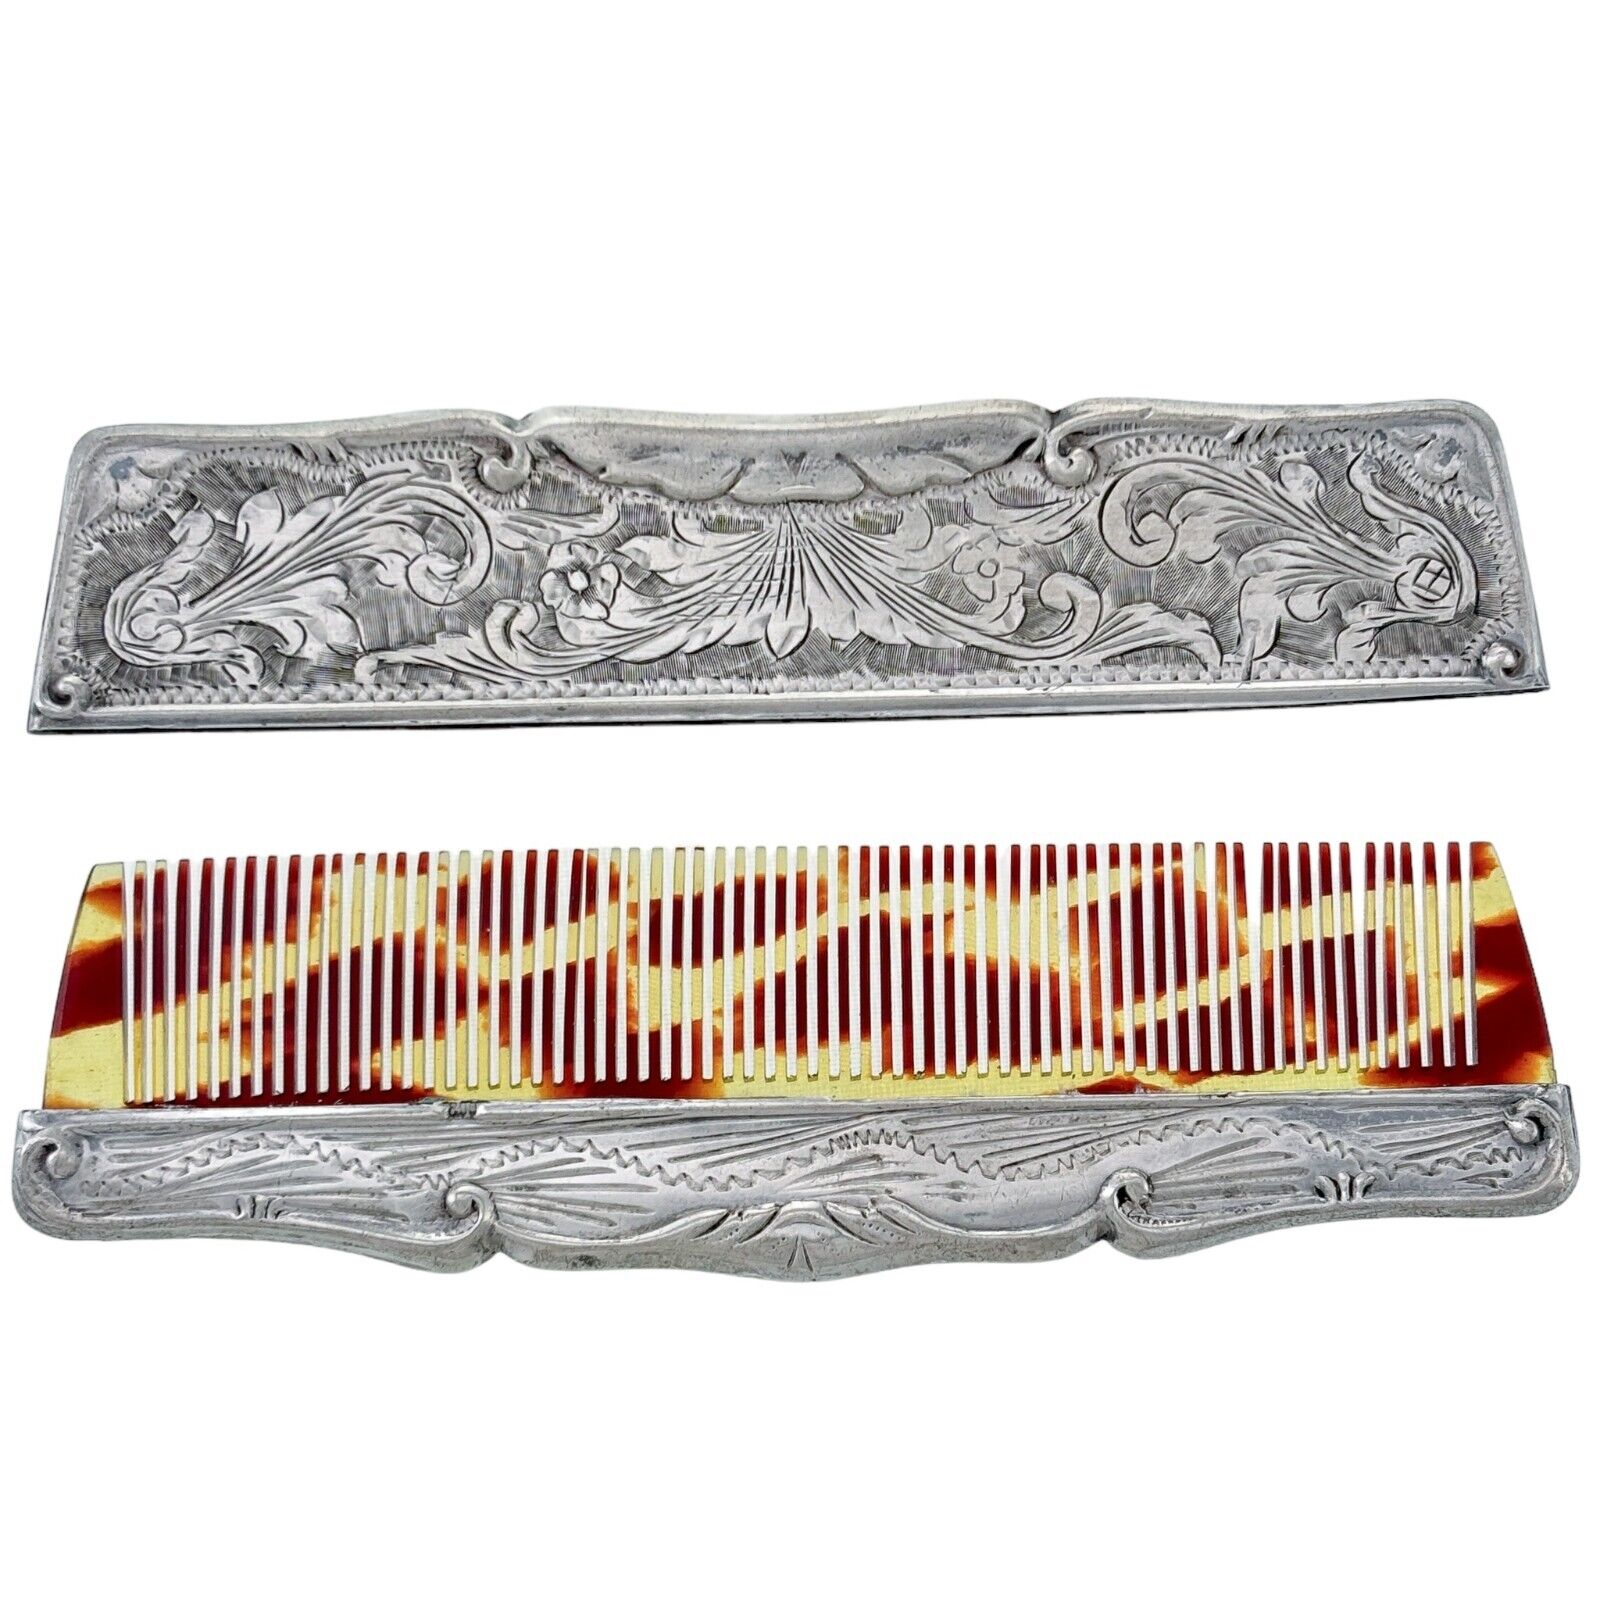 25.5 Gram Vintage/Antique Hair Comb In Silver 800 Floral Repousse Scrolled Case